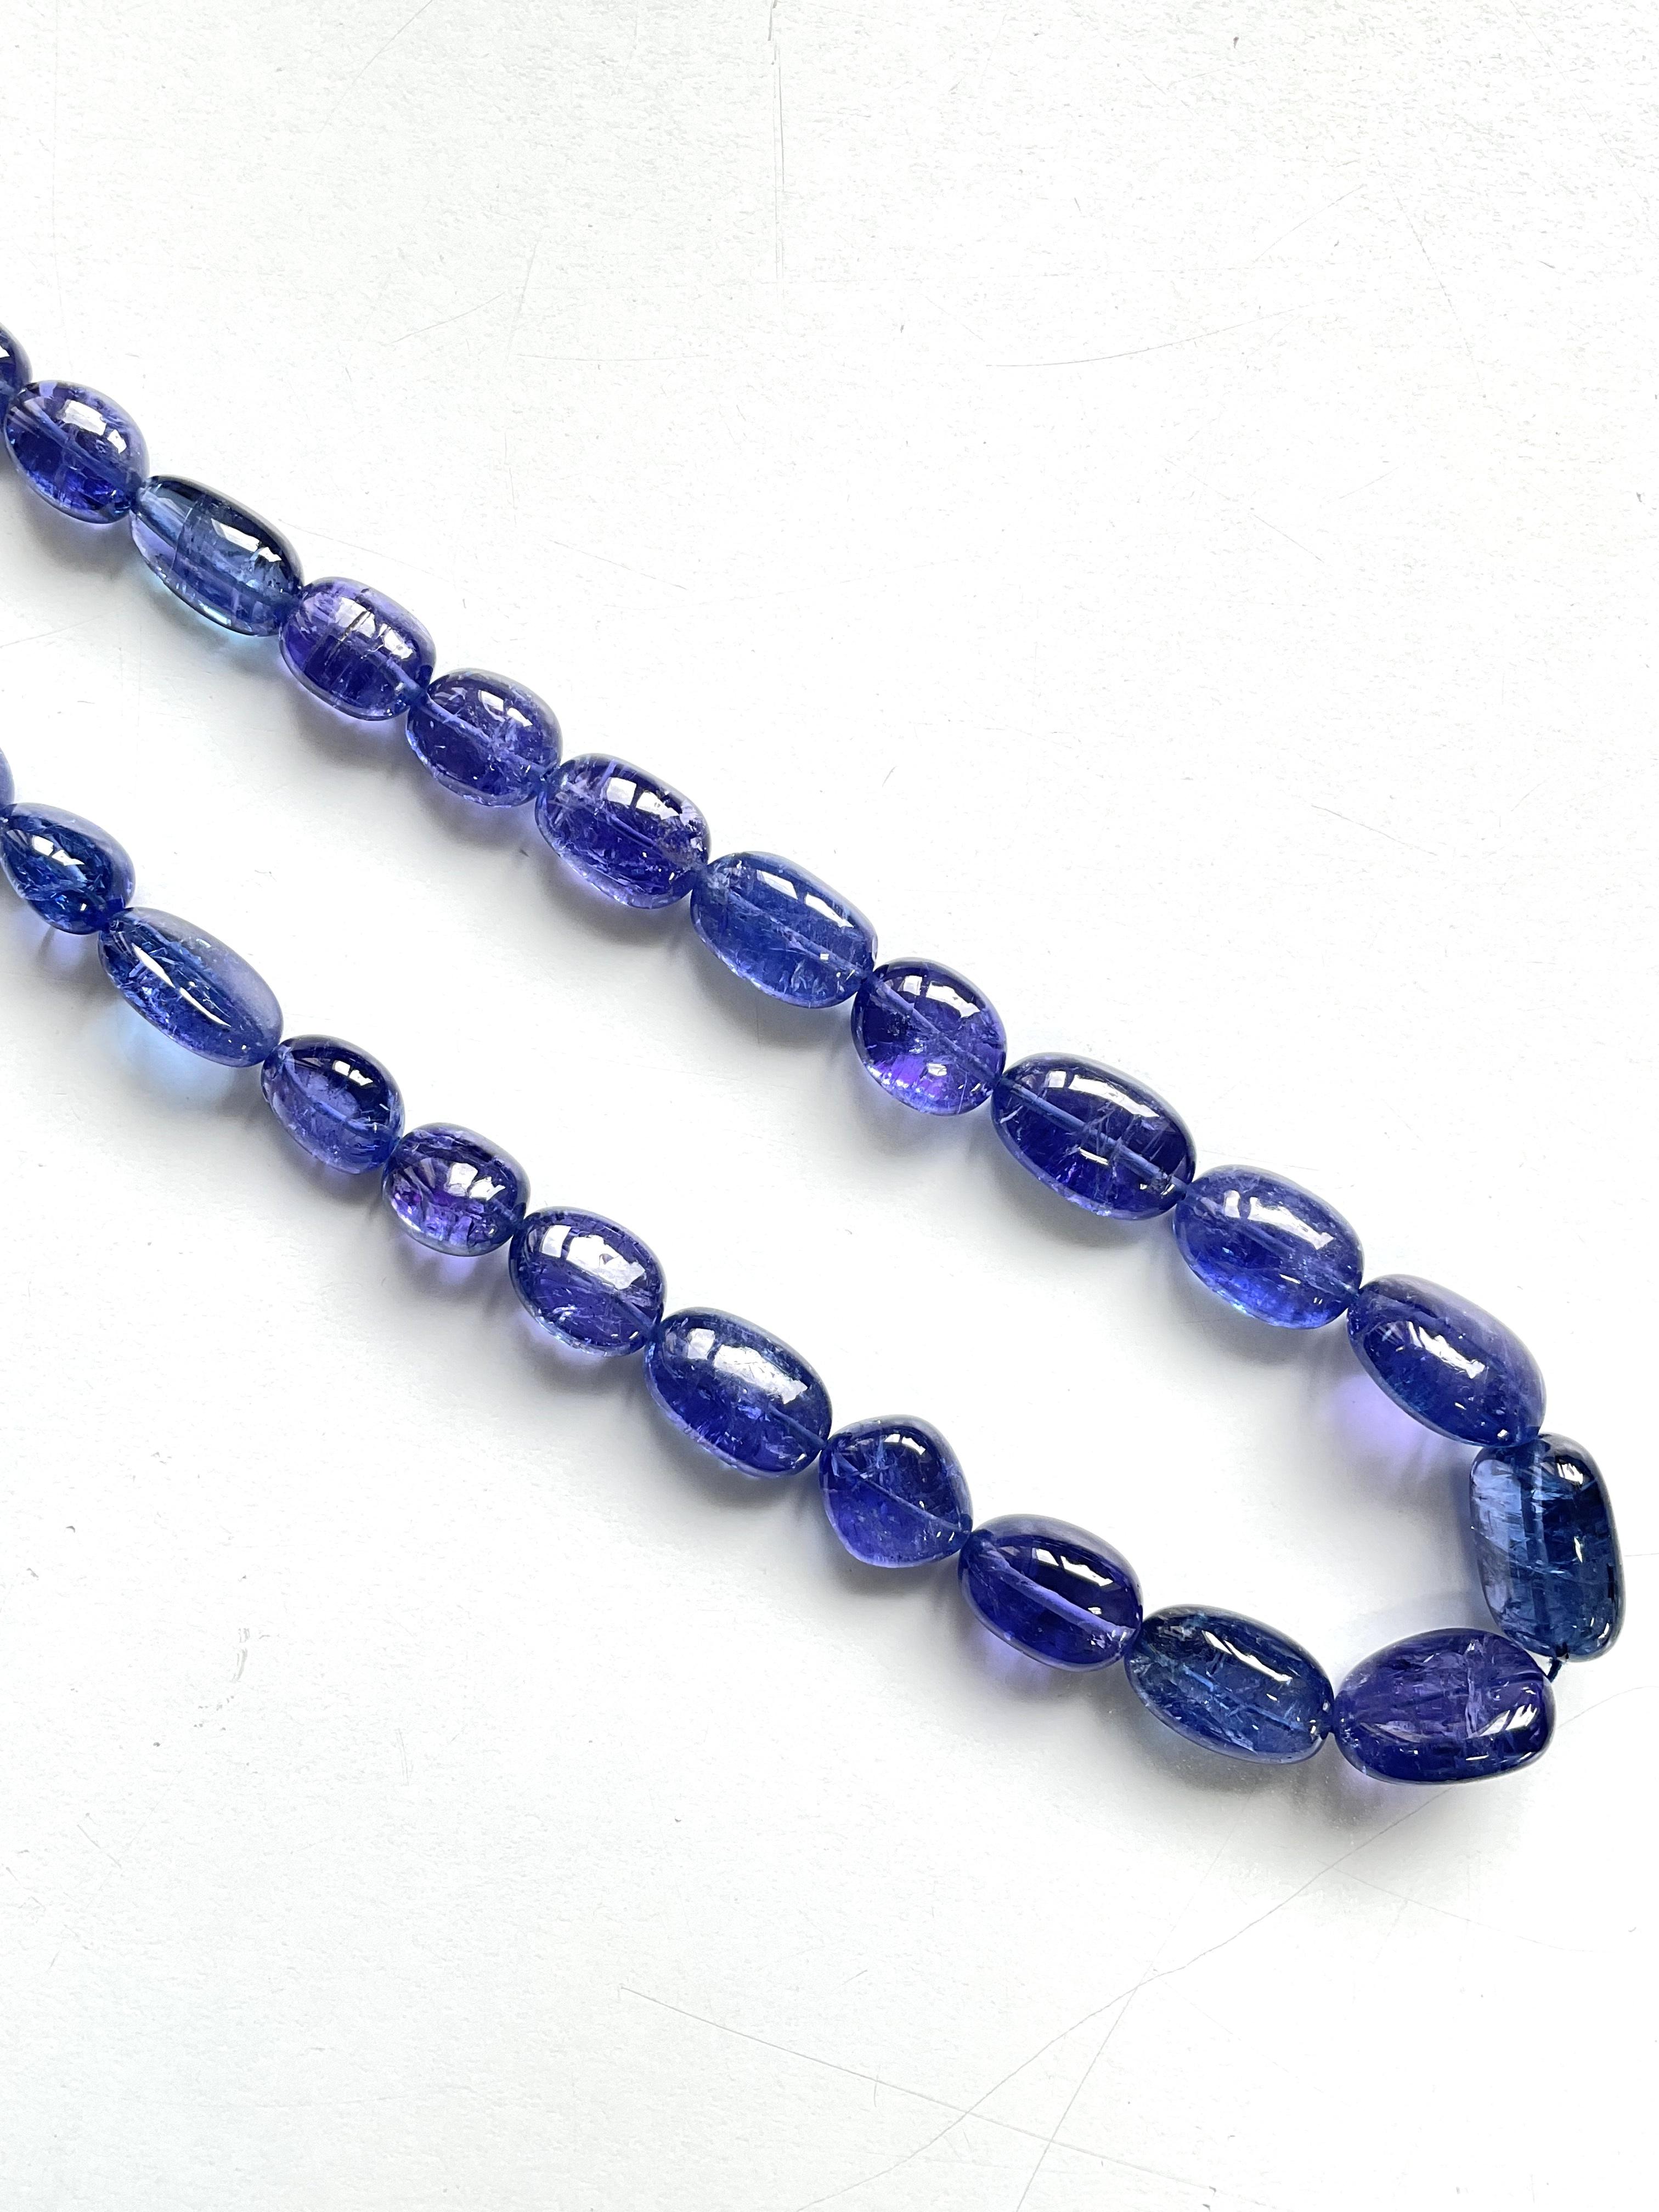 461.15 Carats Tanzanite Top Quality Tumbled necklace Fine Jewelry Natural Gems For Sale 1